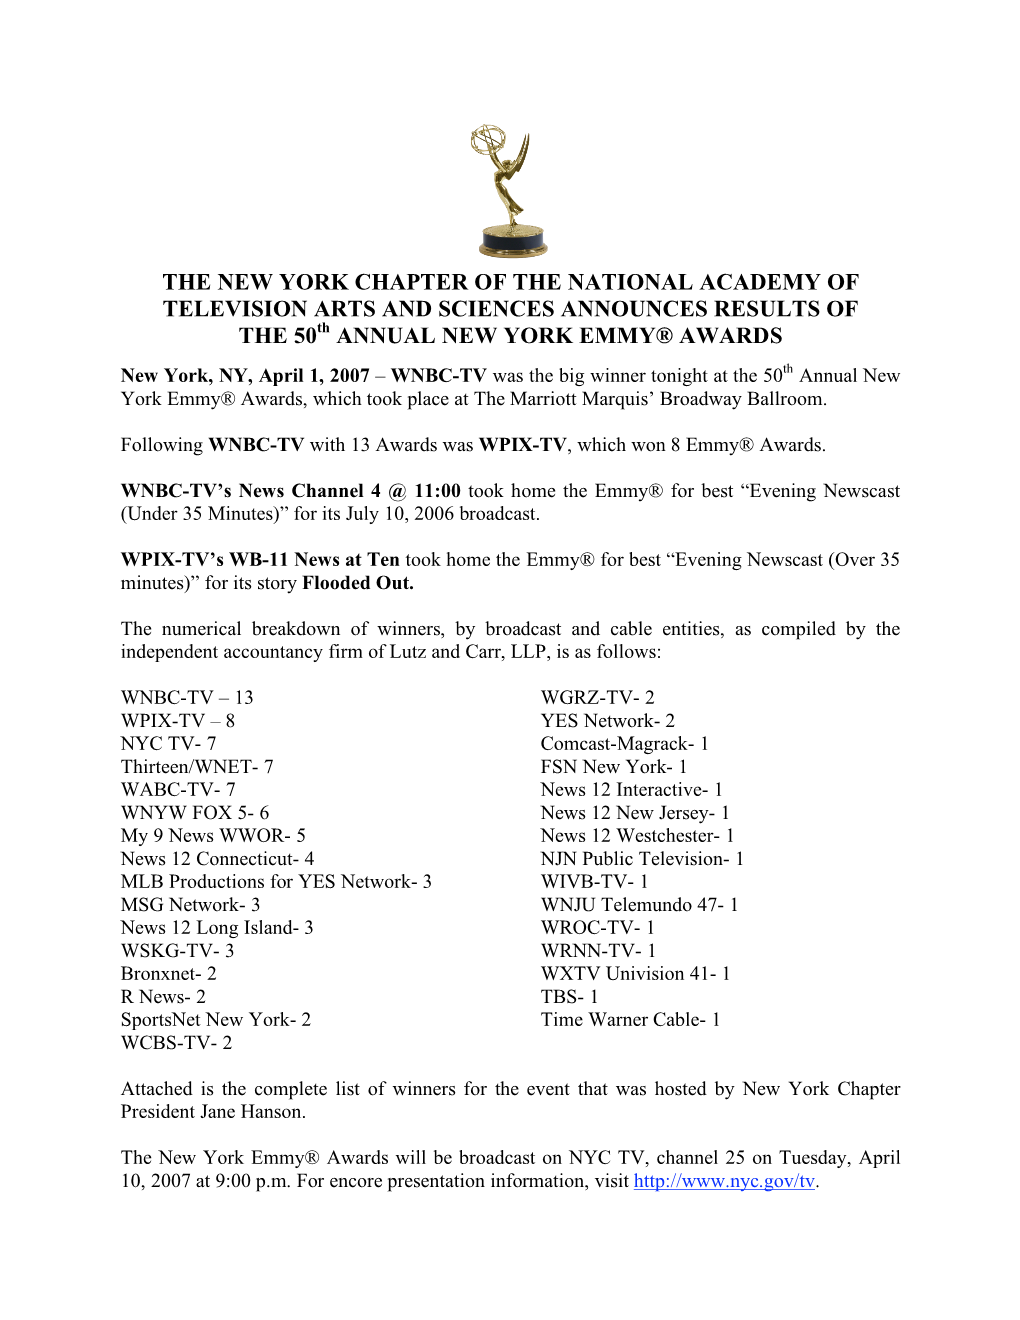 THE NEW YORK CHAPTER of the NATIONAL ACADEMY of TELEVISION ARTS and SCIENCES ANNOUNCES RESULTS of the 50Th ANNUAL NEW YORK EMMY® AWARDS